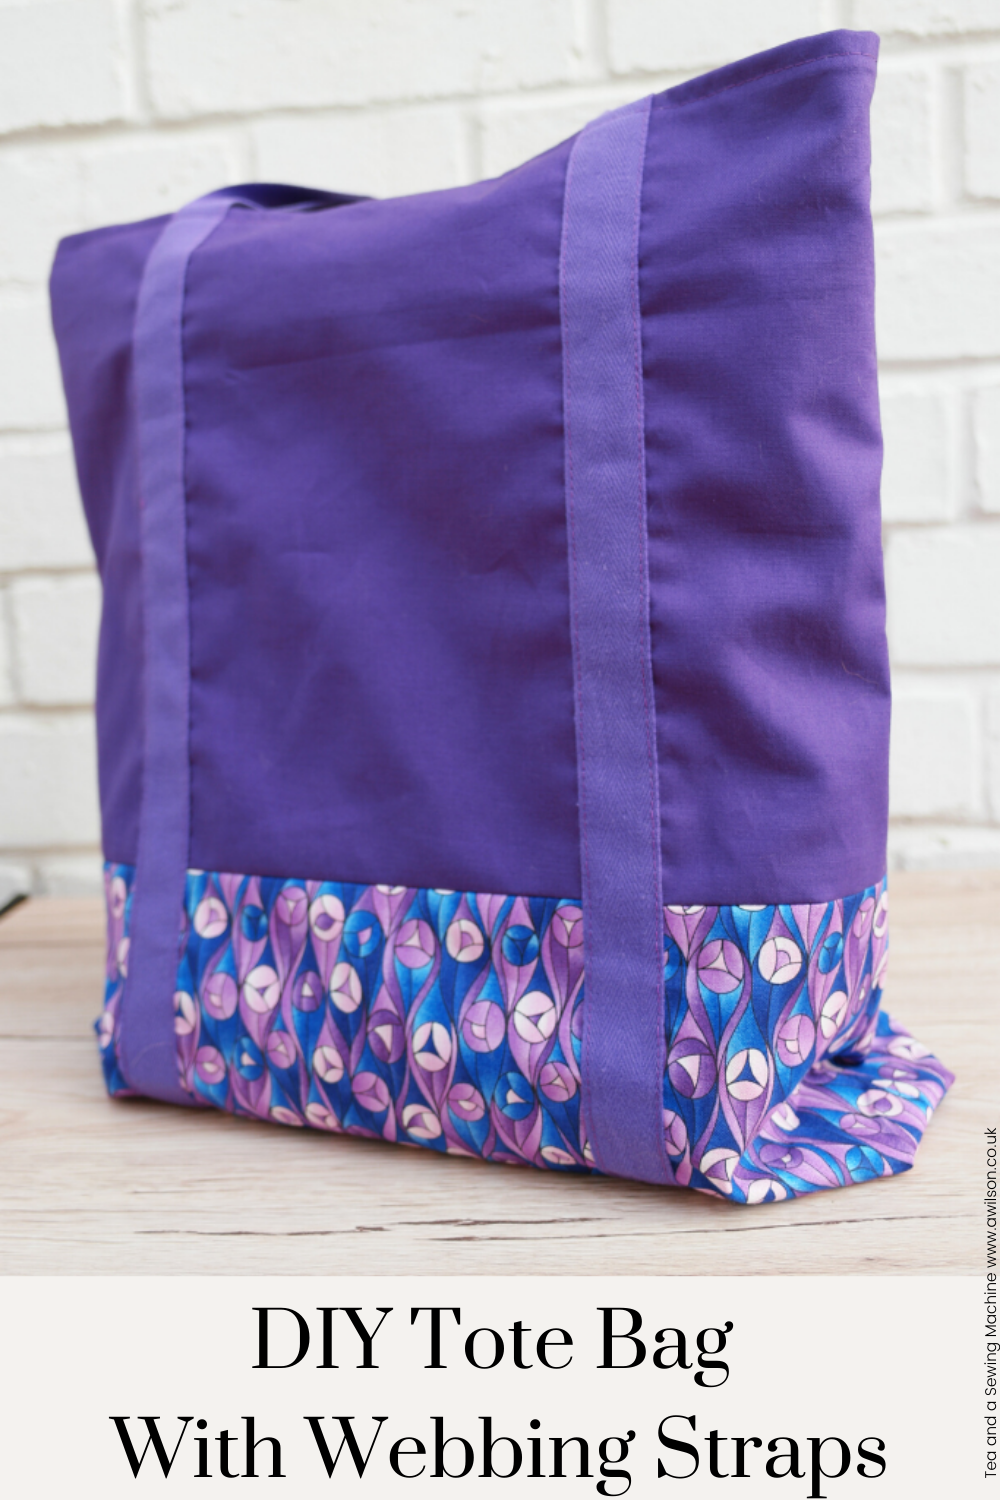 How to Sew a Homemade Luggage Handle Wrap from Fabric - Easy DIY Project 